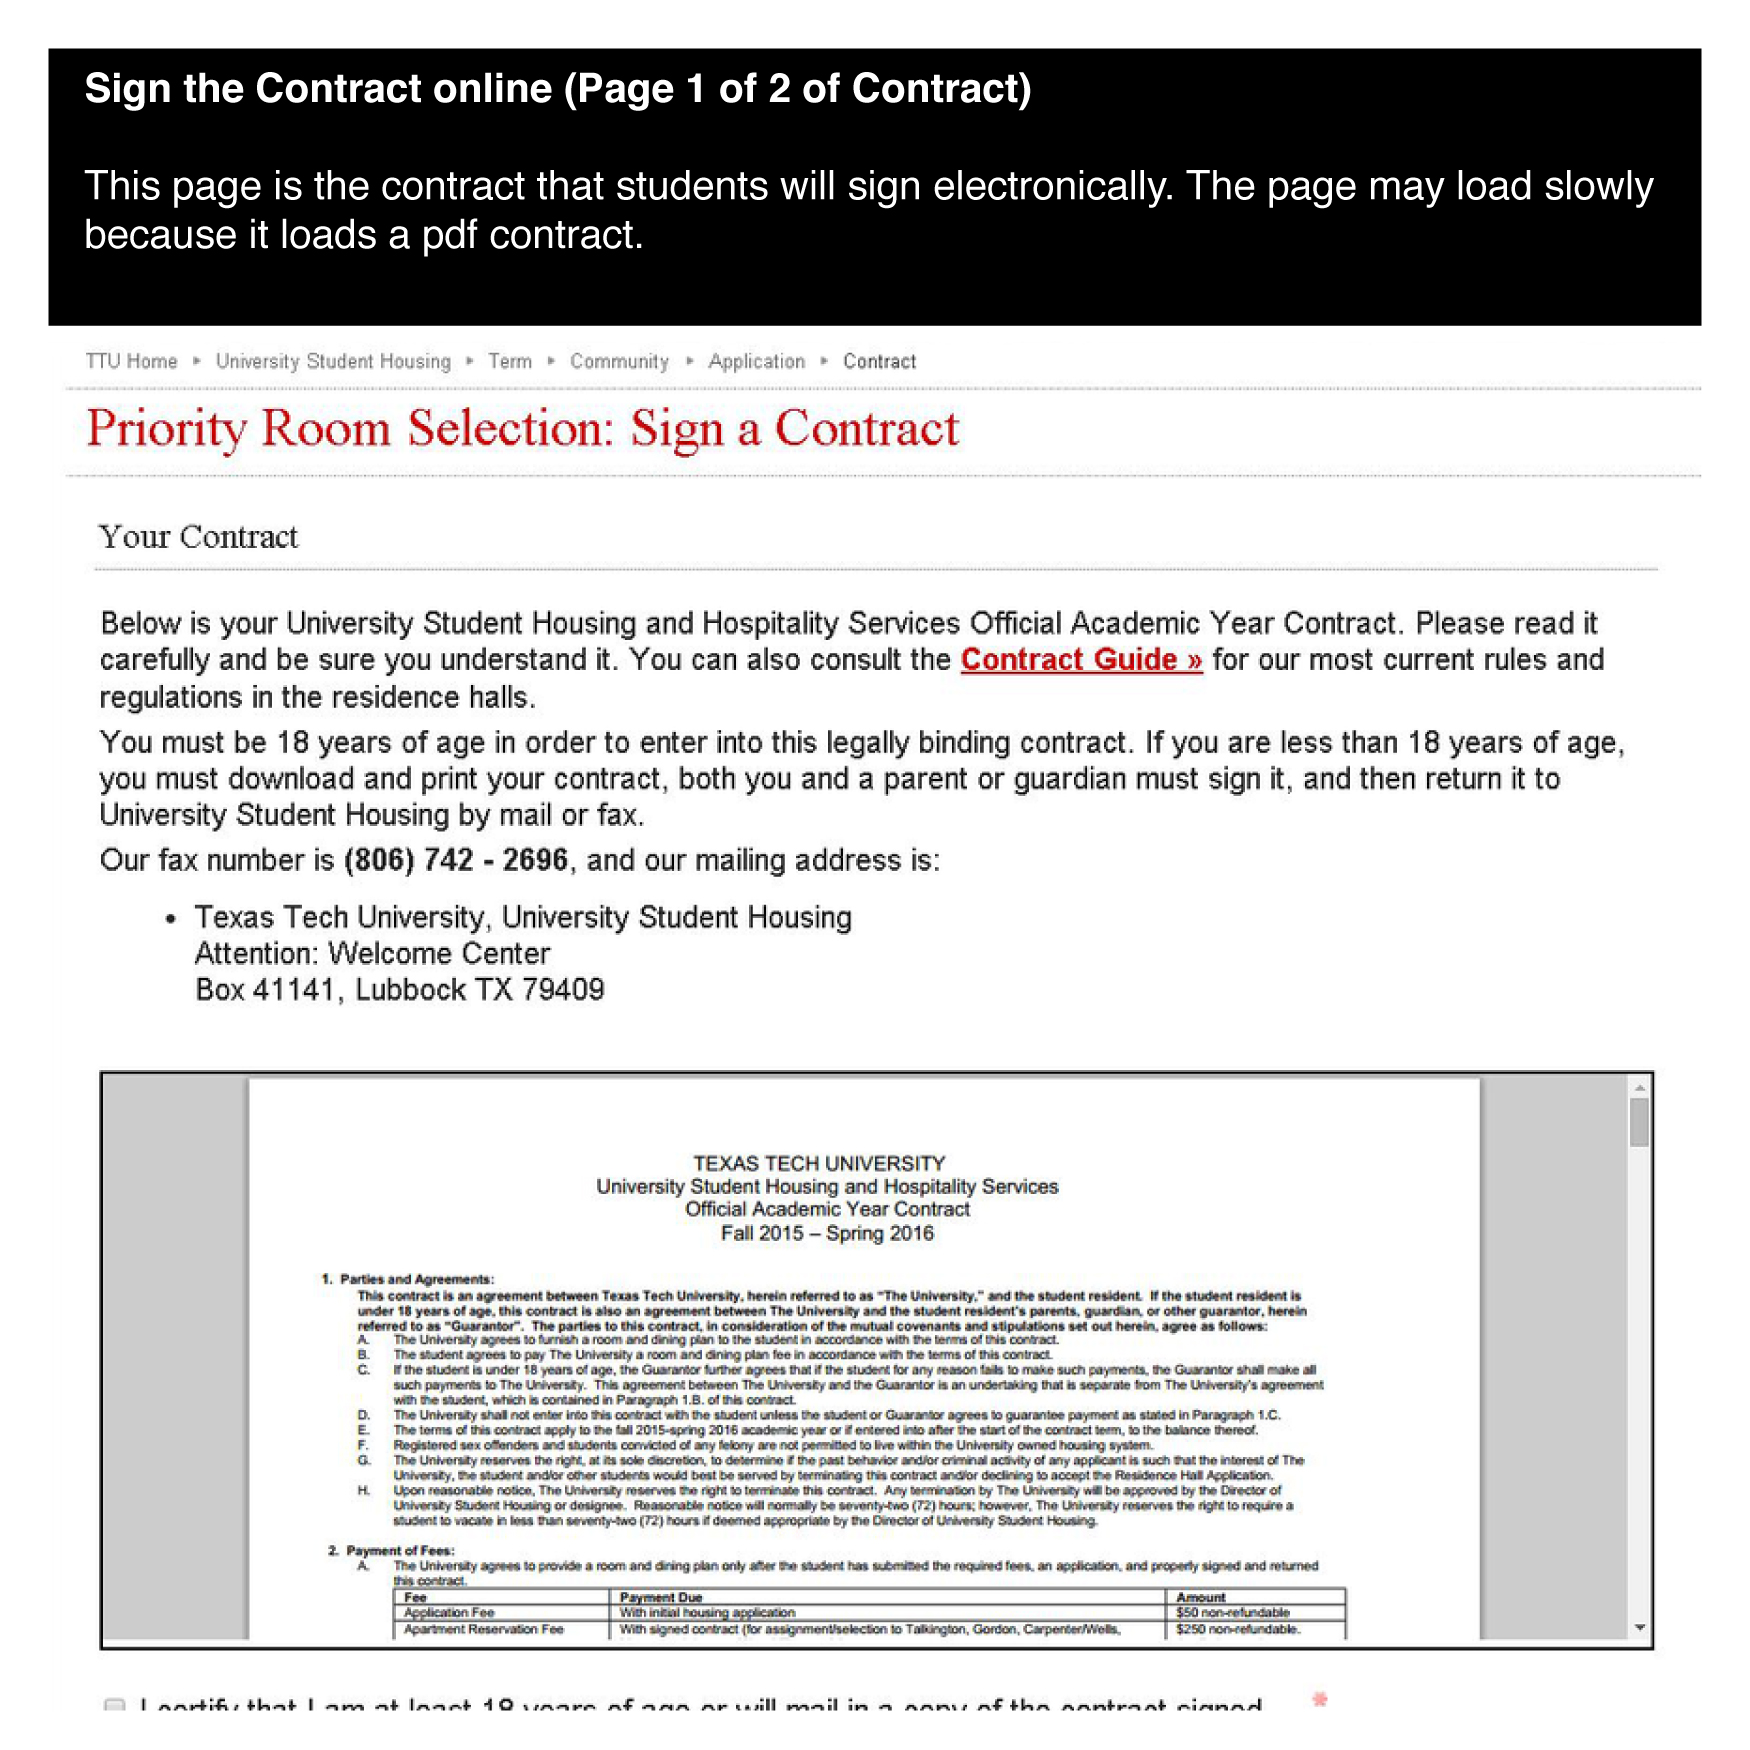 Sign the Contract online (Page 1 of 2 of Contract) This page is the contract that students will sign electronically. The page may load slowly because it loads a pdf contract.